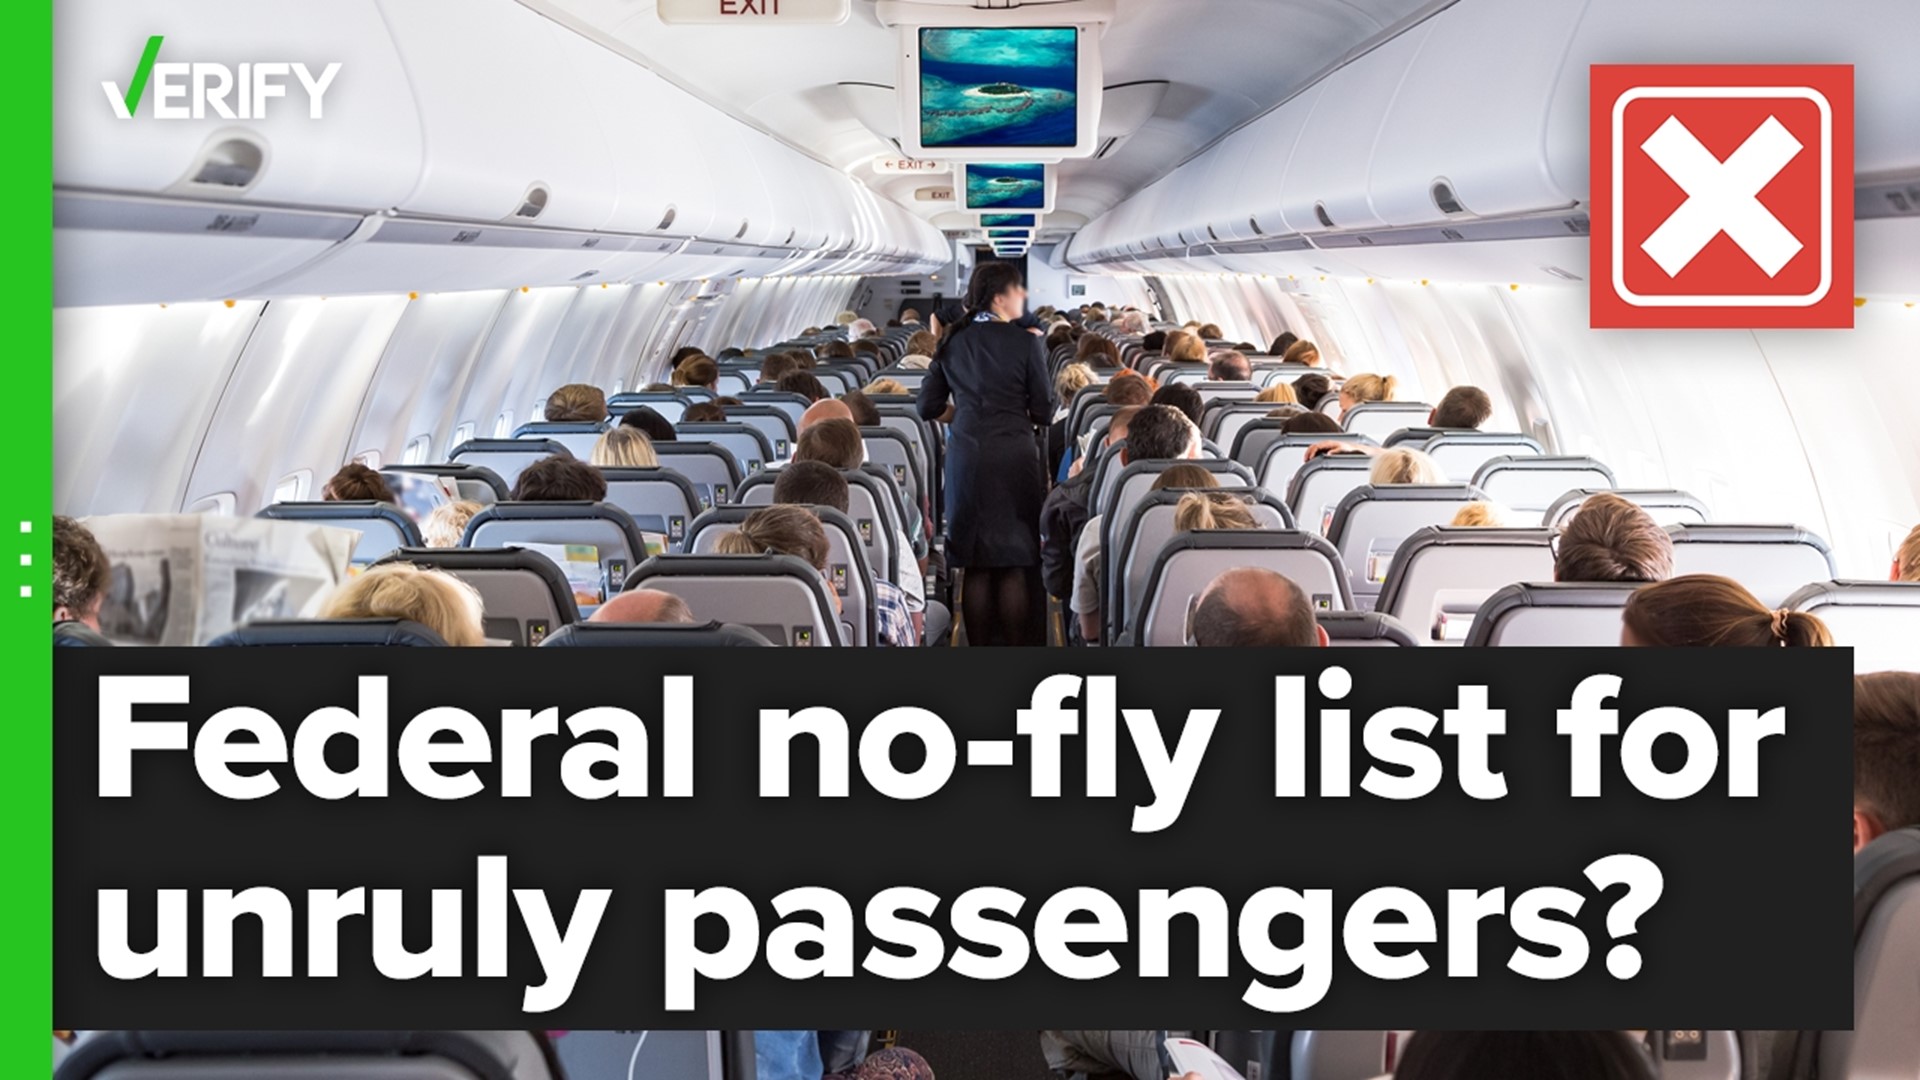 Individual airlines can ban unruly passengers from boarding their planes, but there is not a federal no-fly list for people who have been abusive or unruly on planes